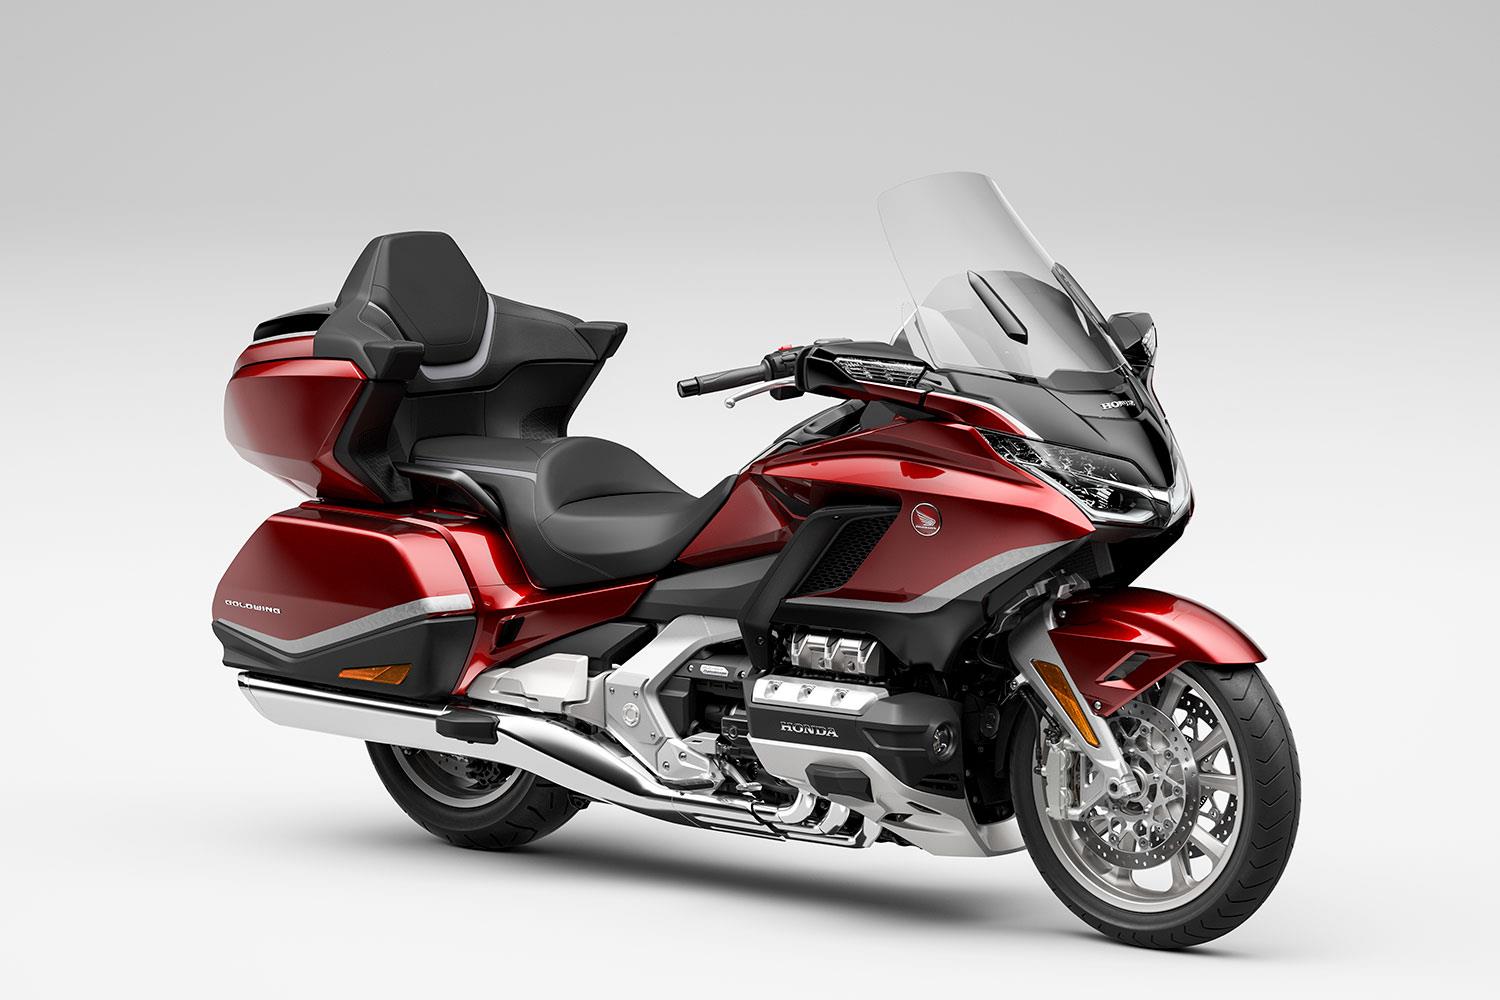 Too much of a good Wing Honda Gold Wing improves in all areas as it